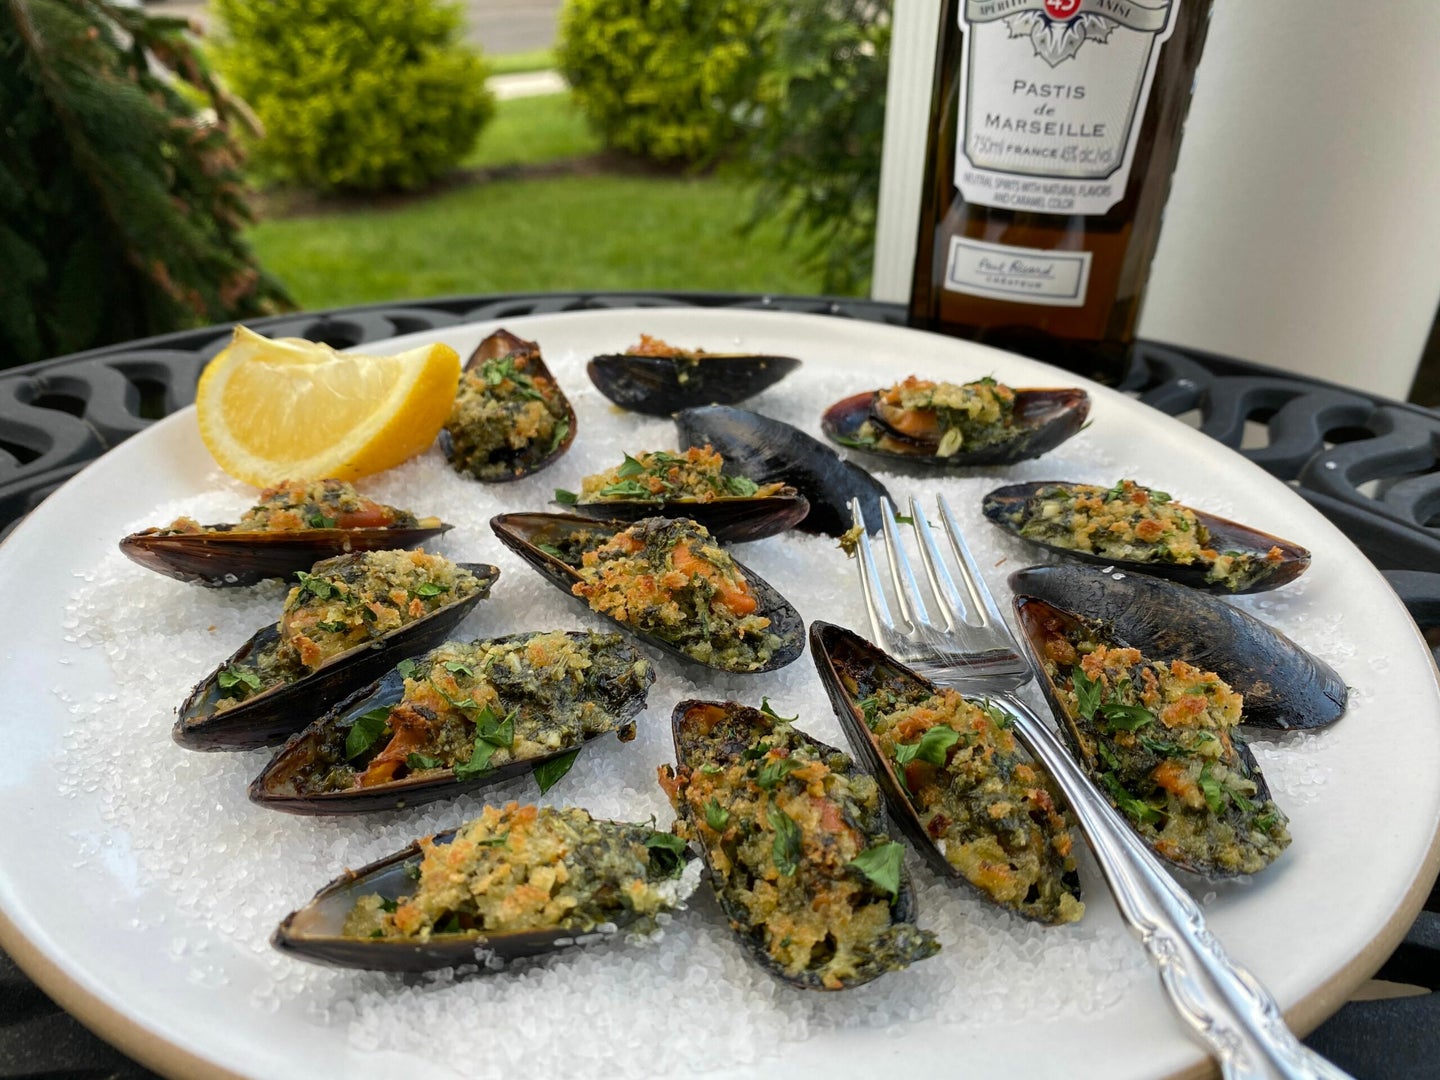 Mussels Rockefeller with Pastis Butter